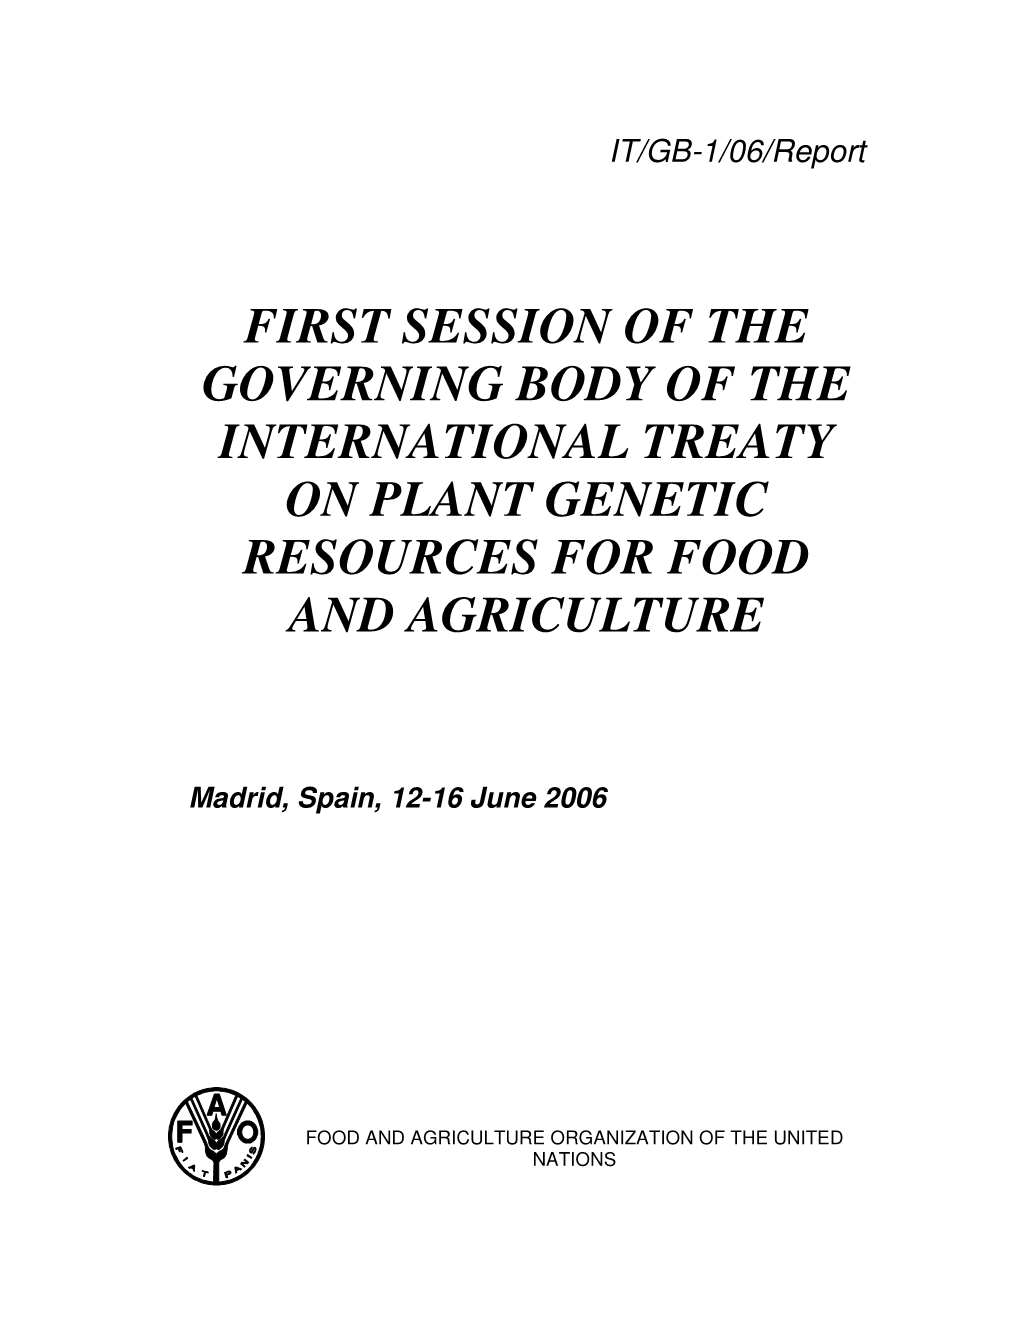 First Session of the Governing Body of the International Treaty on Plant Genetic Resources for Food and Agriculture